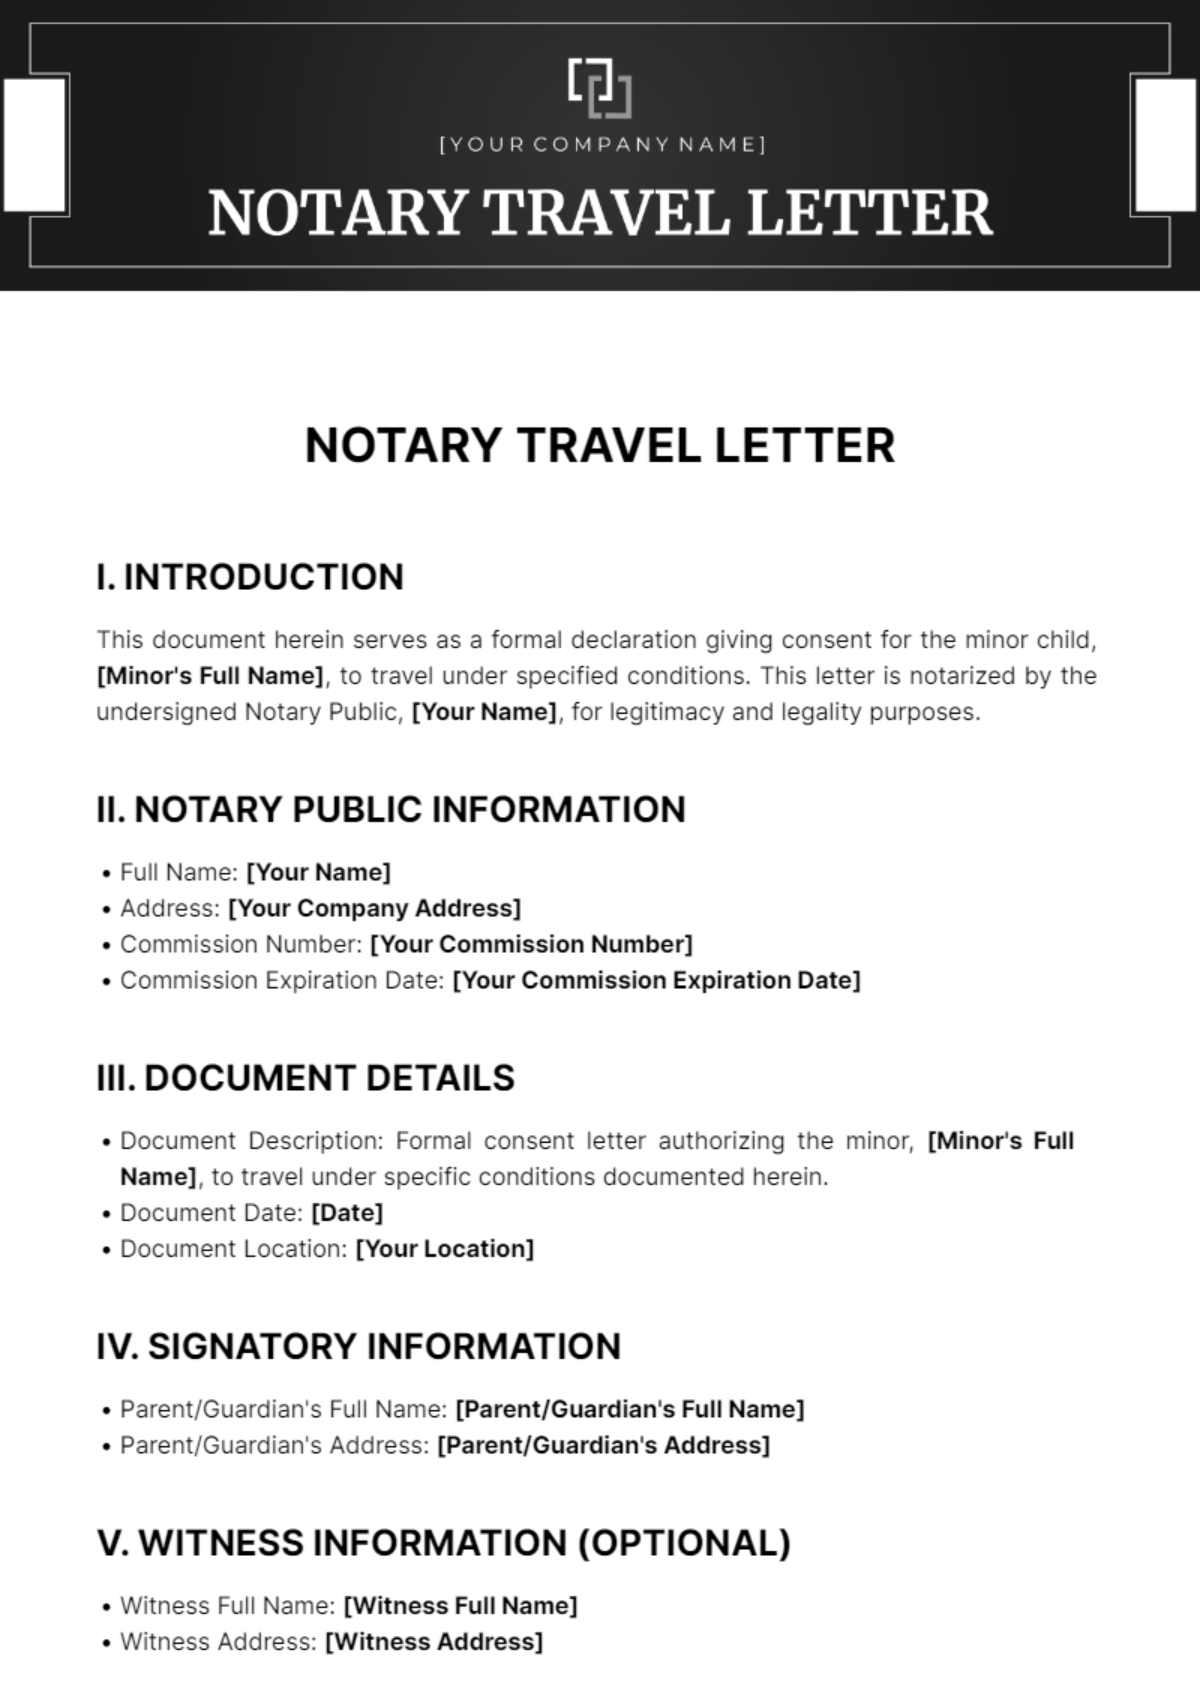 Free Notary Travel Letter Template